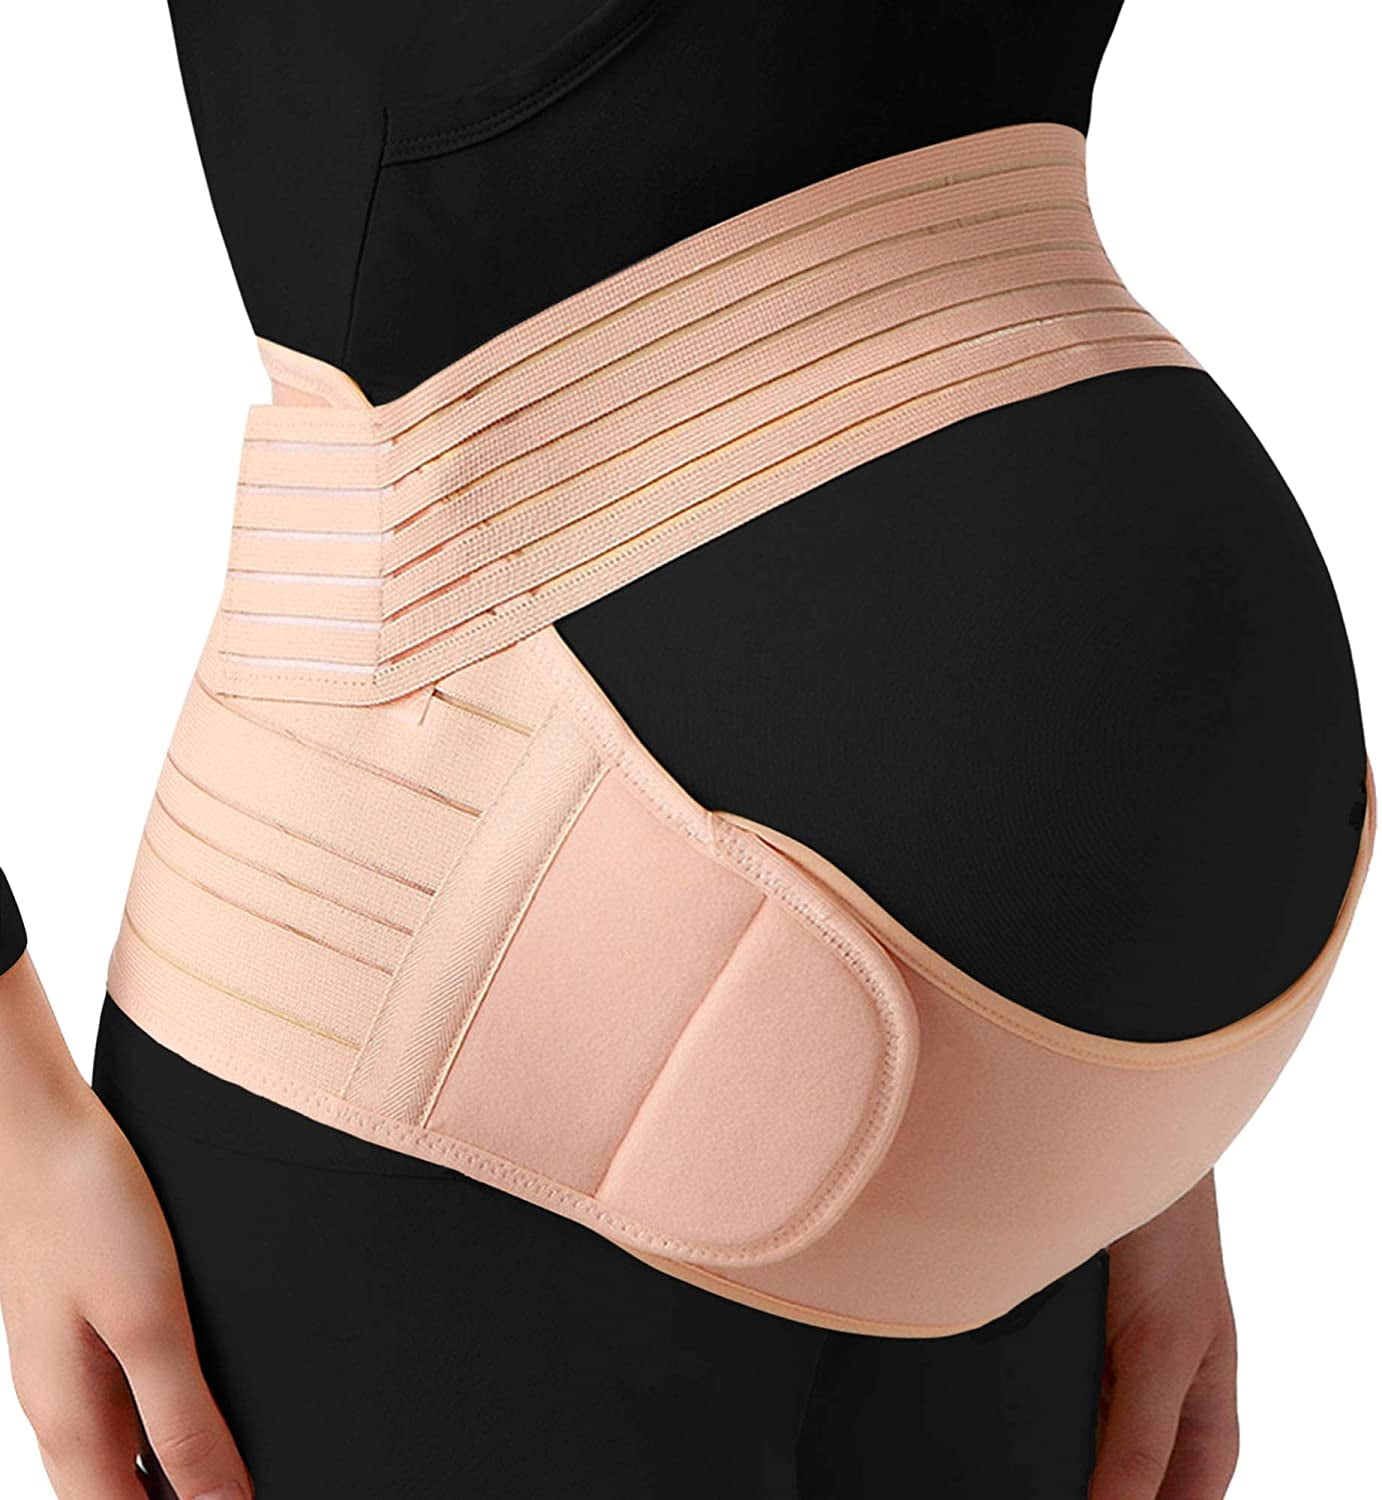 3 in 1 Maternity Belt Back Waist Abdomen Support Belly Band Postpartum Recovery 